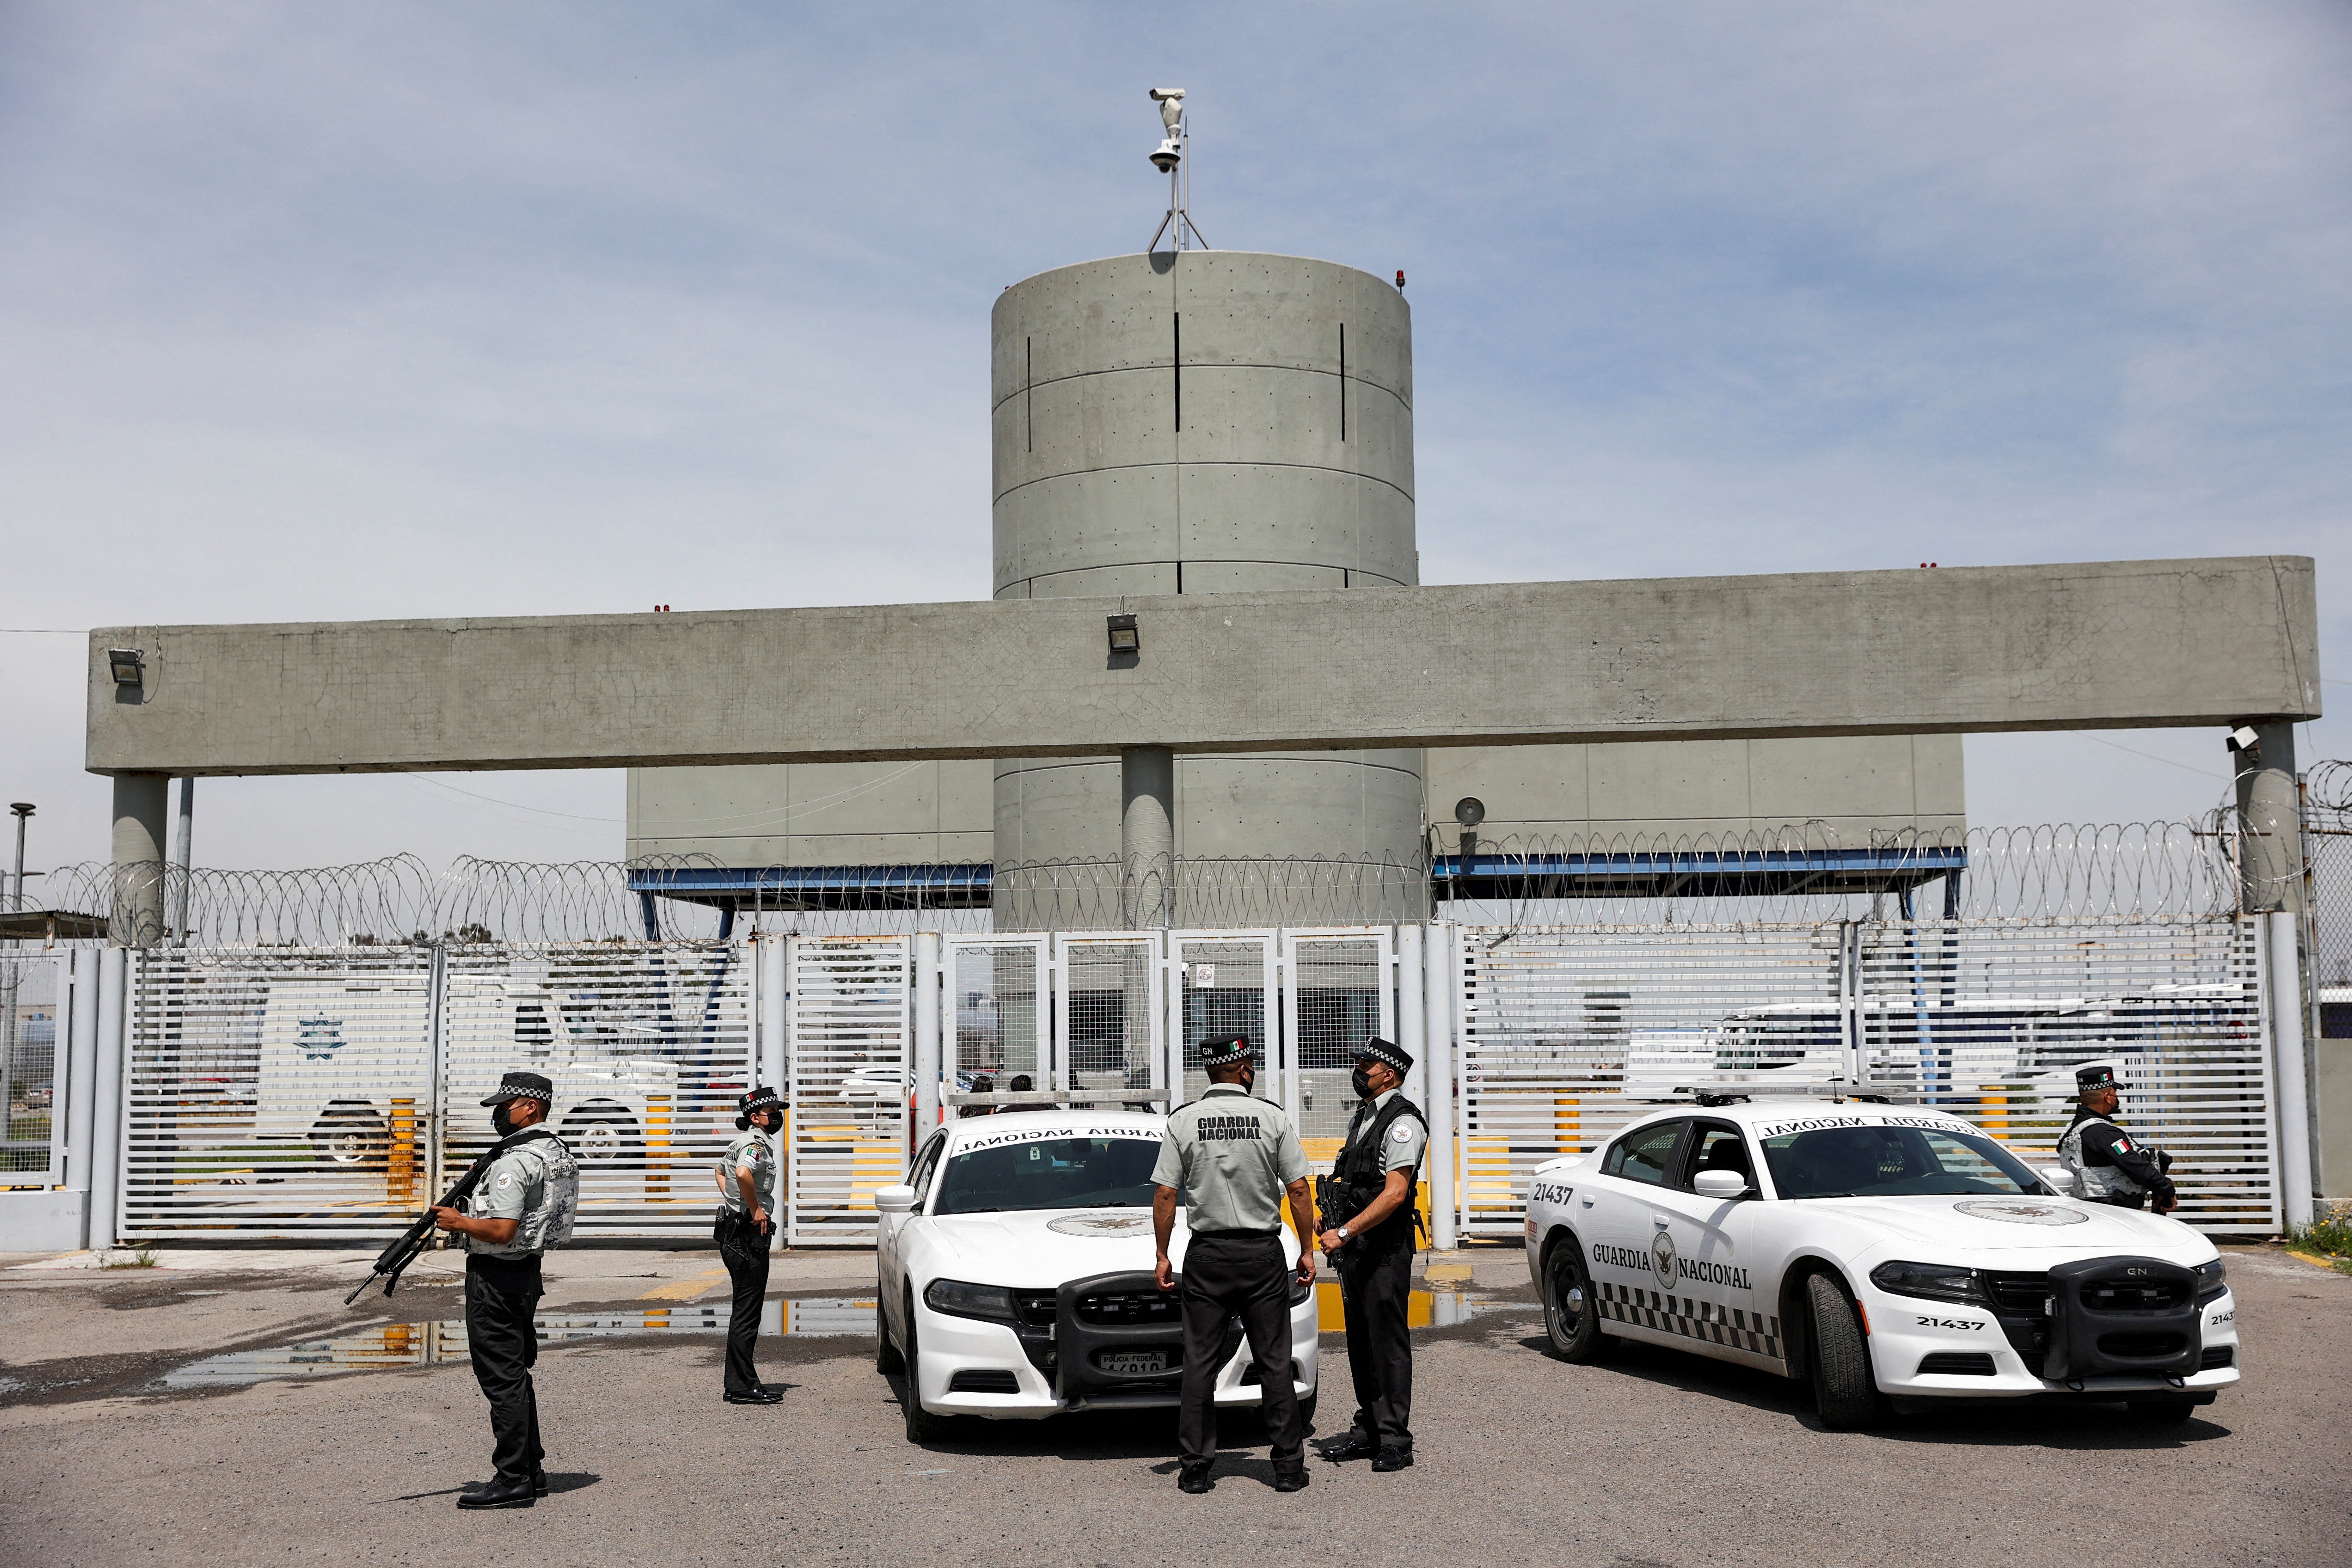 Members of the National Guard stand outside Altiplano Federal Penitentiary, where drug lord Rafael Caro Quintero is imprisoned